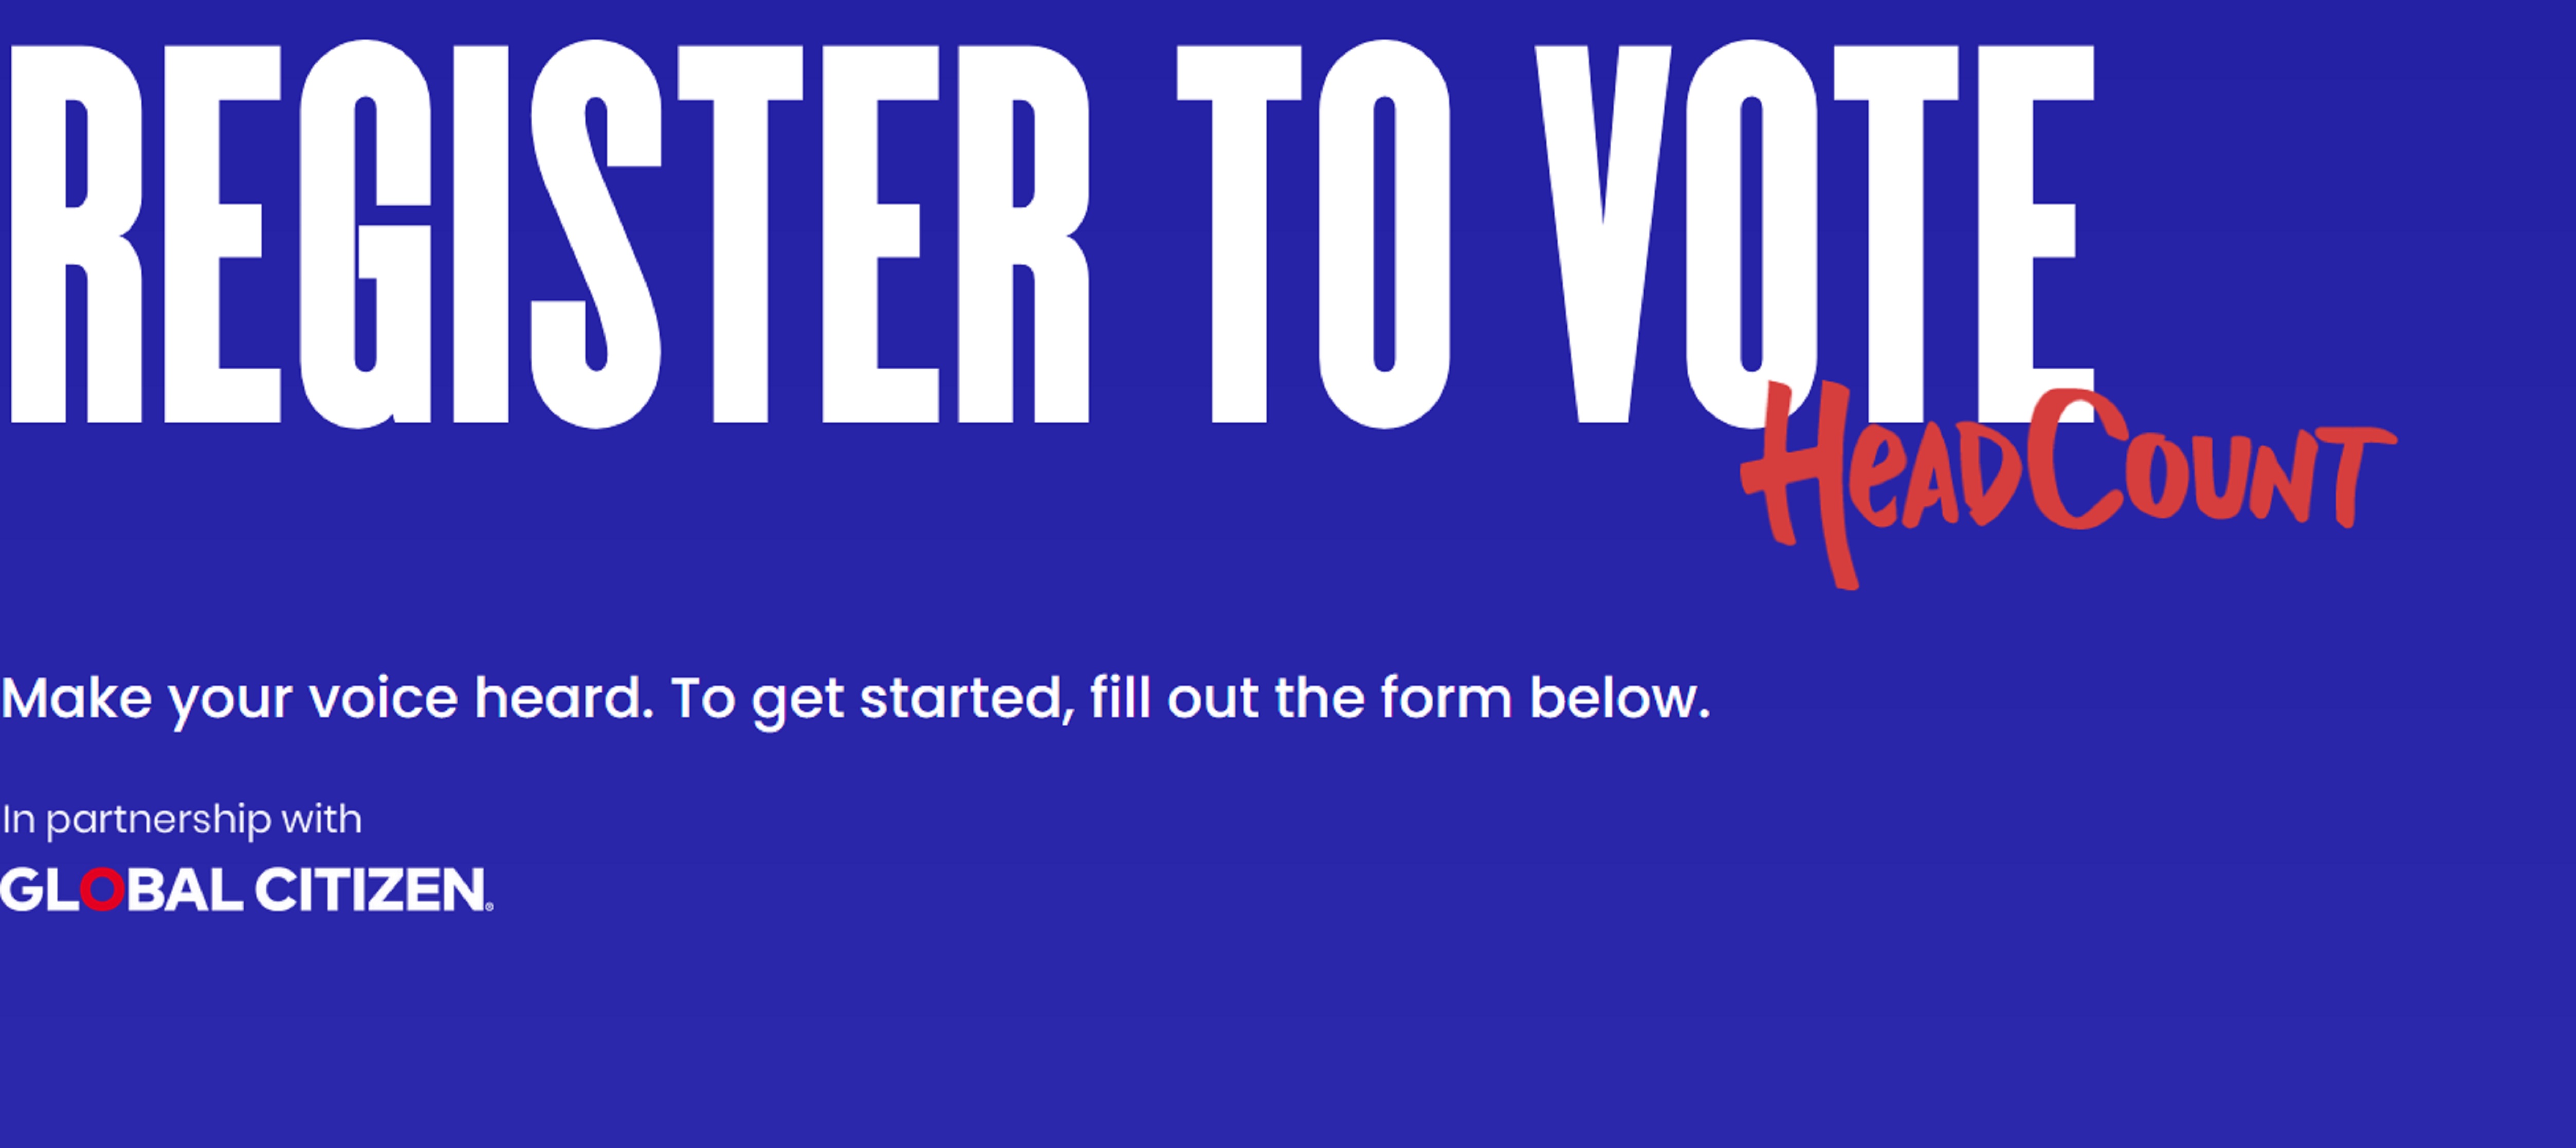 Today is National Voter Registration Day!